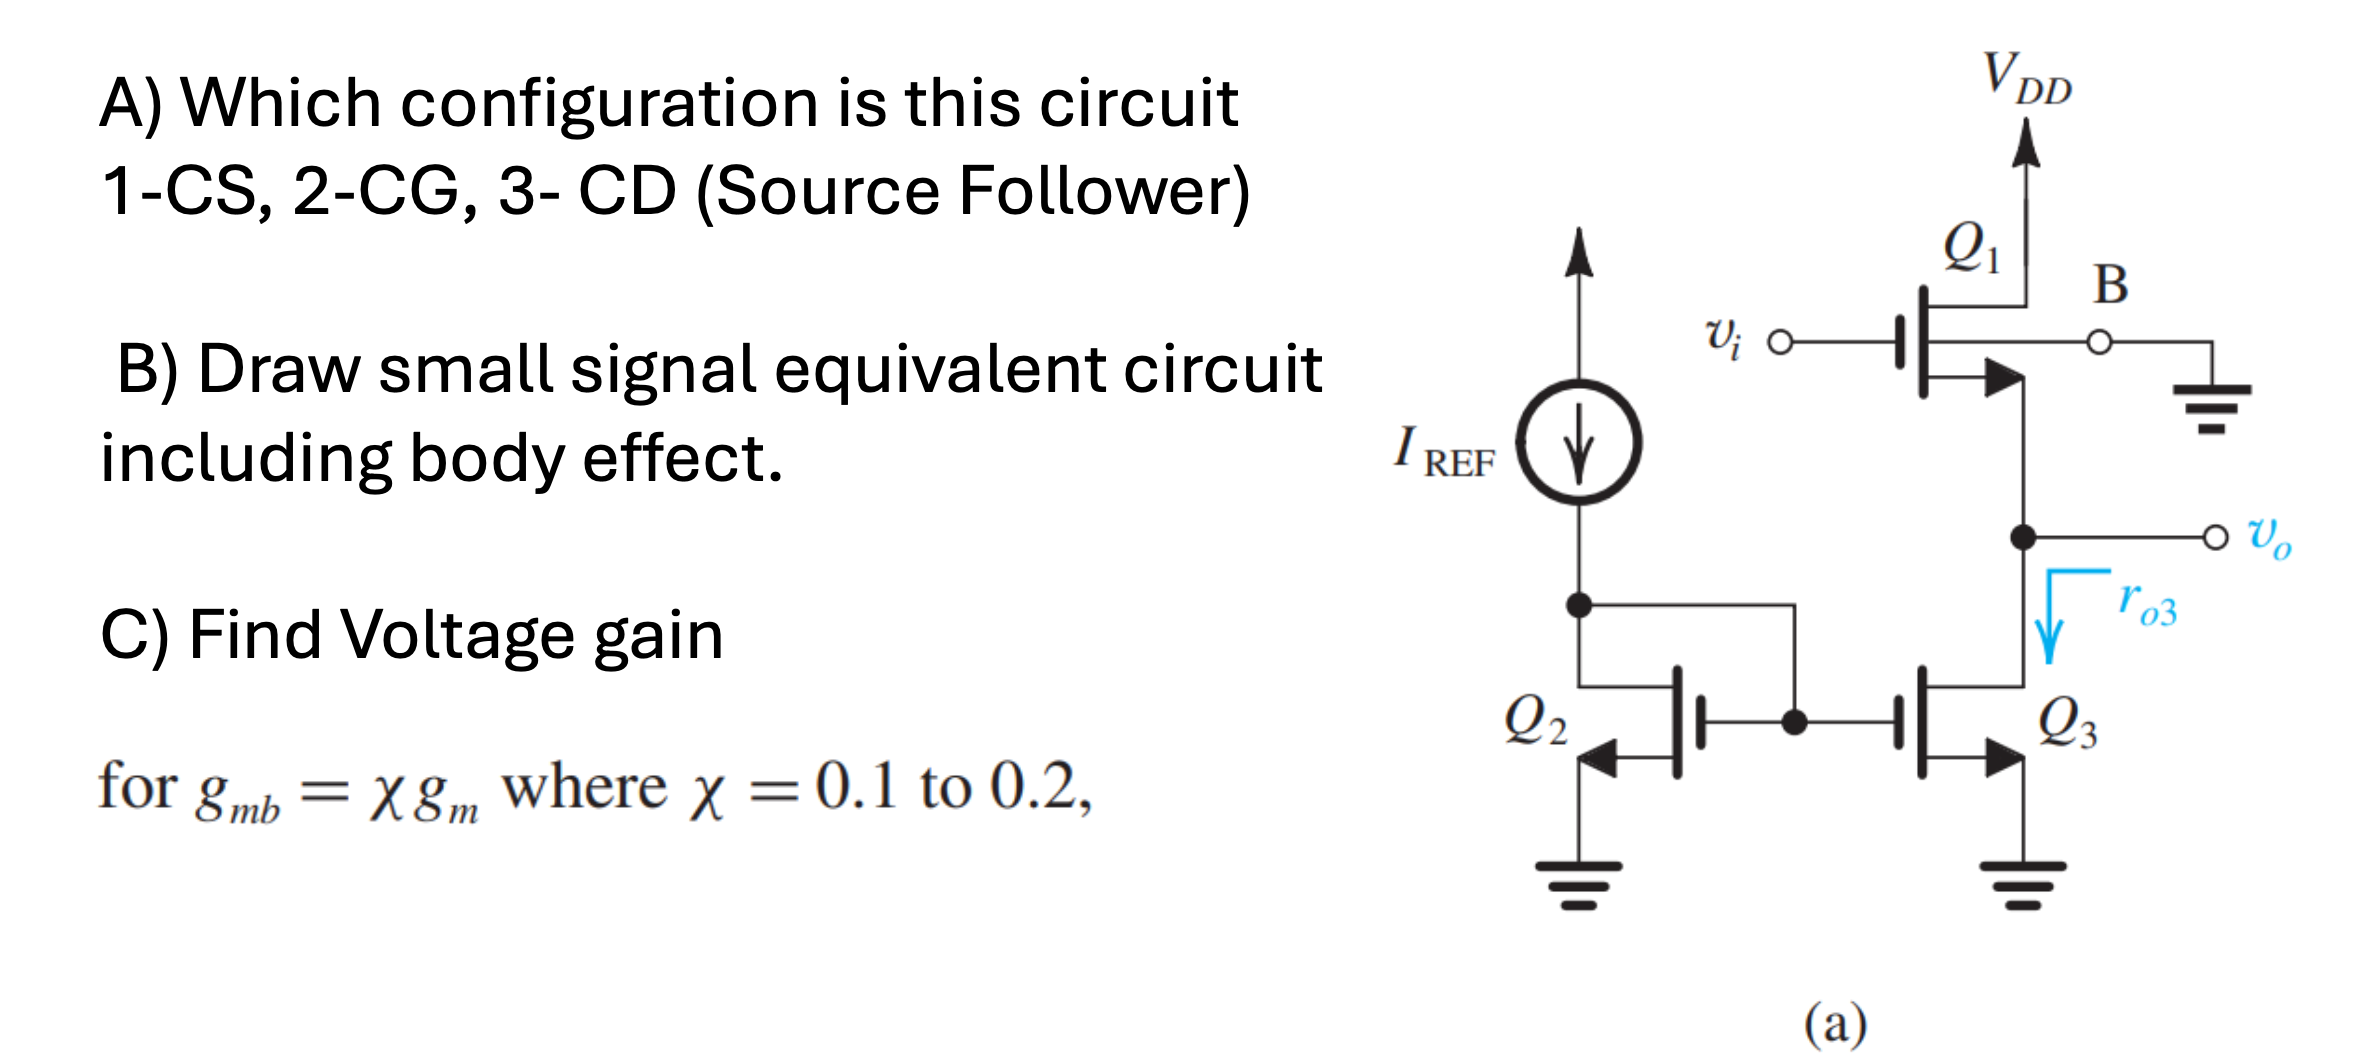 A) Which configuration is this circuit 1-CS, 2-CG, 3- CD (Source Follower) B) Draw small signal equivalent circuit including body effect. C) Find Voltage gain for gmb = χgm where χ = 0.1 to 0.2, (a)